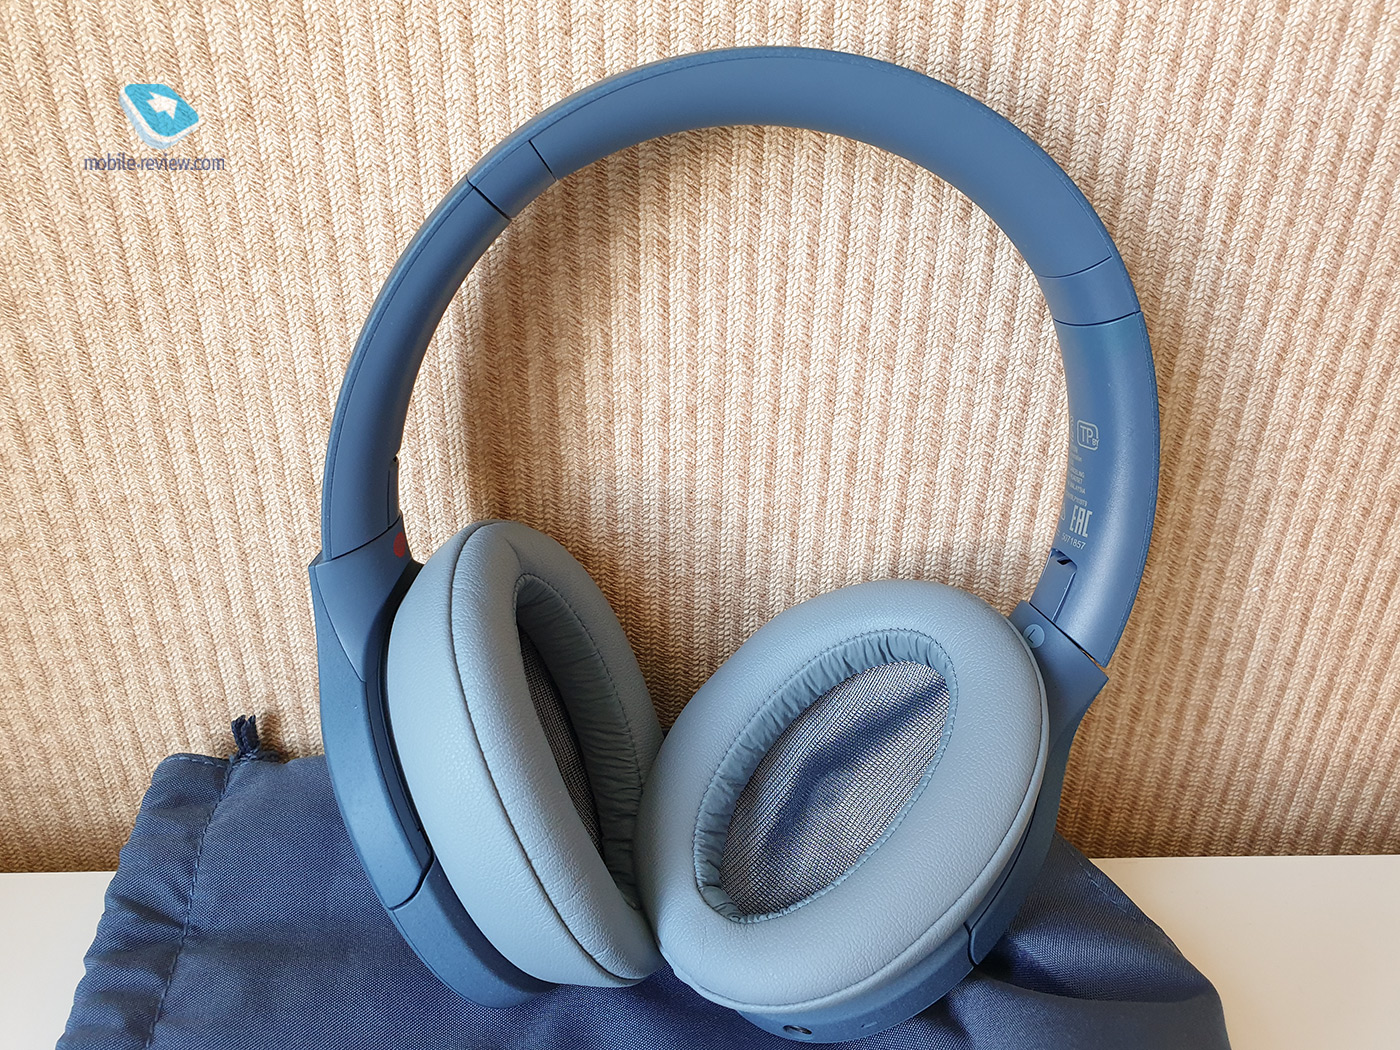 Sony WH-H910N h.ear on 3 headphones: when beauty requires sacrifice